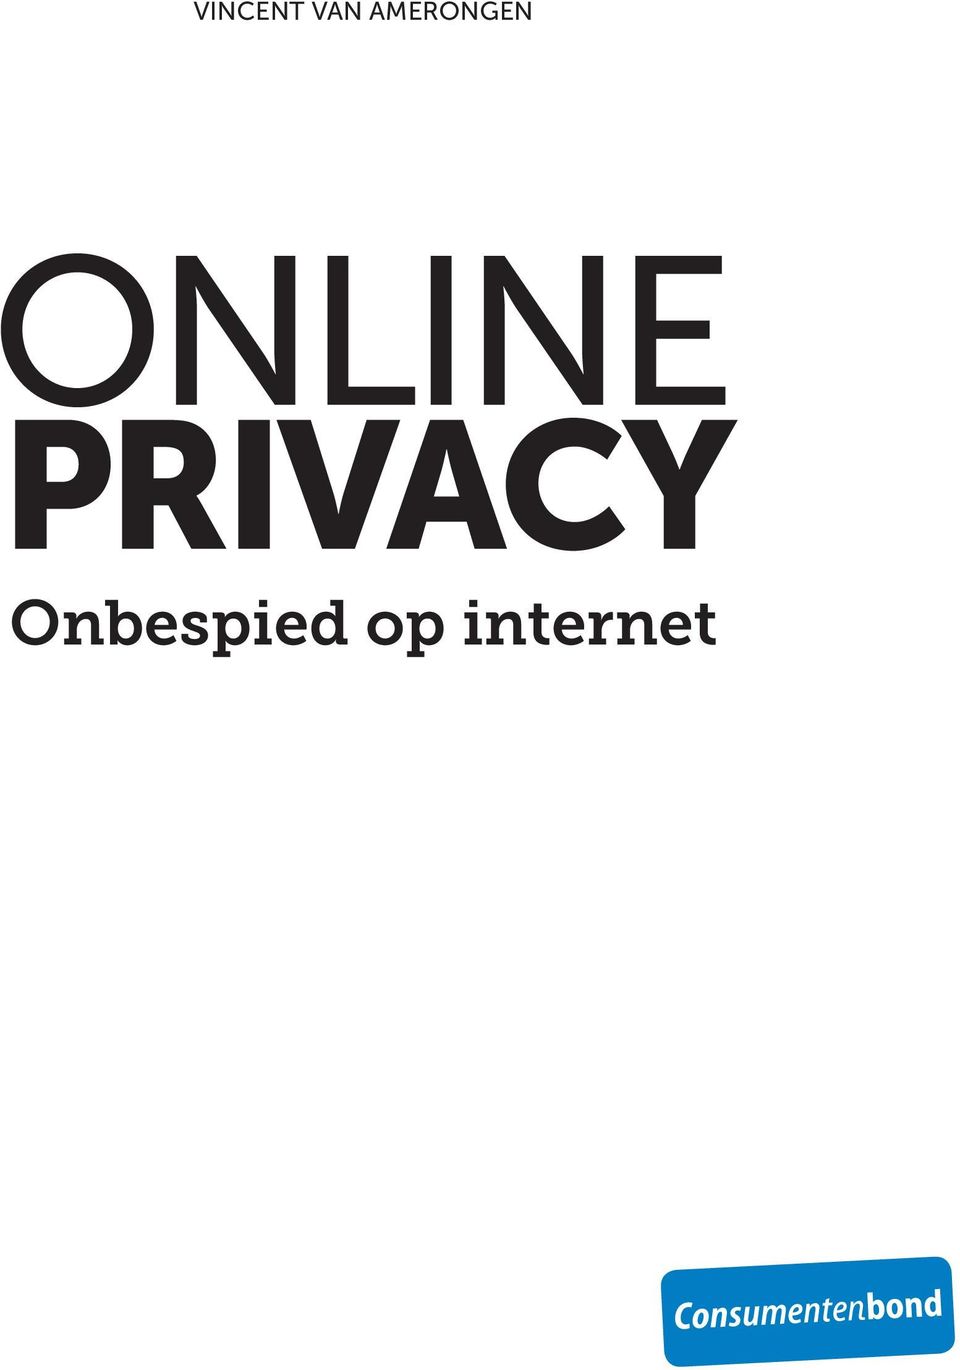 ONLINE PRIVACY